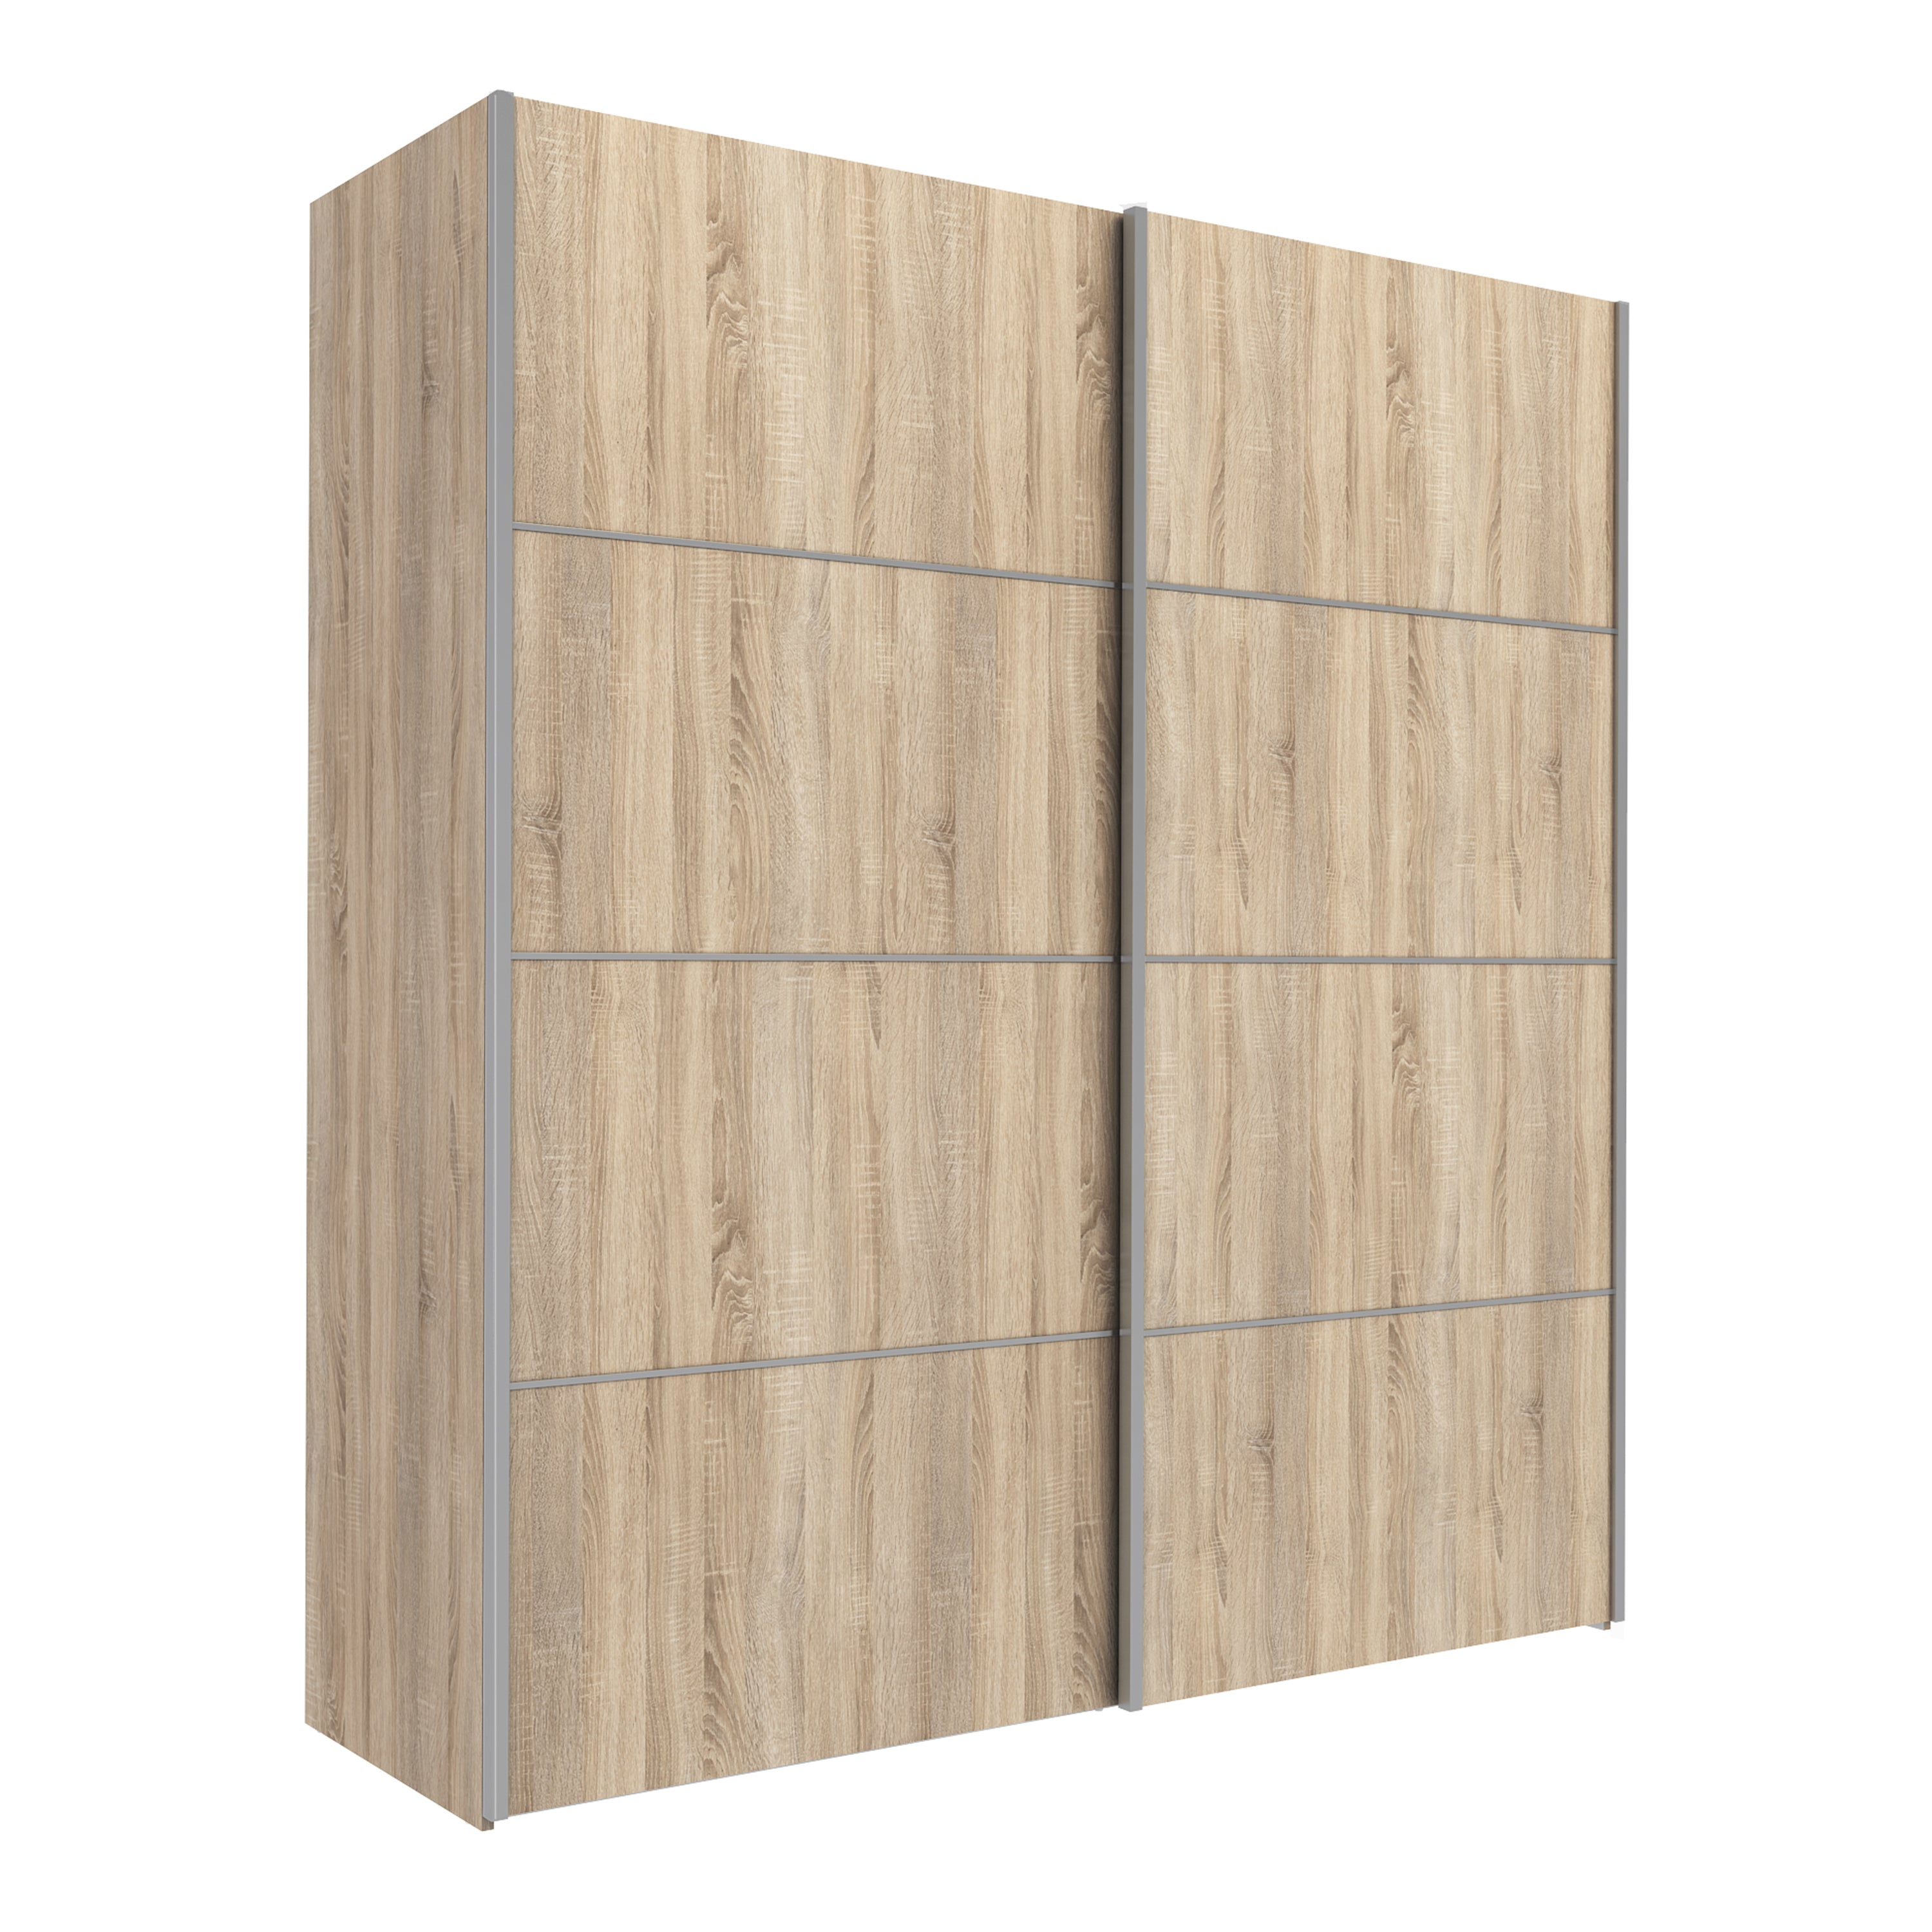 Image of Verona Sliding Wardrobe With 5 Shelves 180cm - Available In 6 Colours